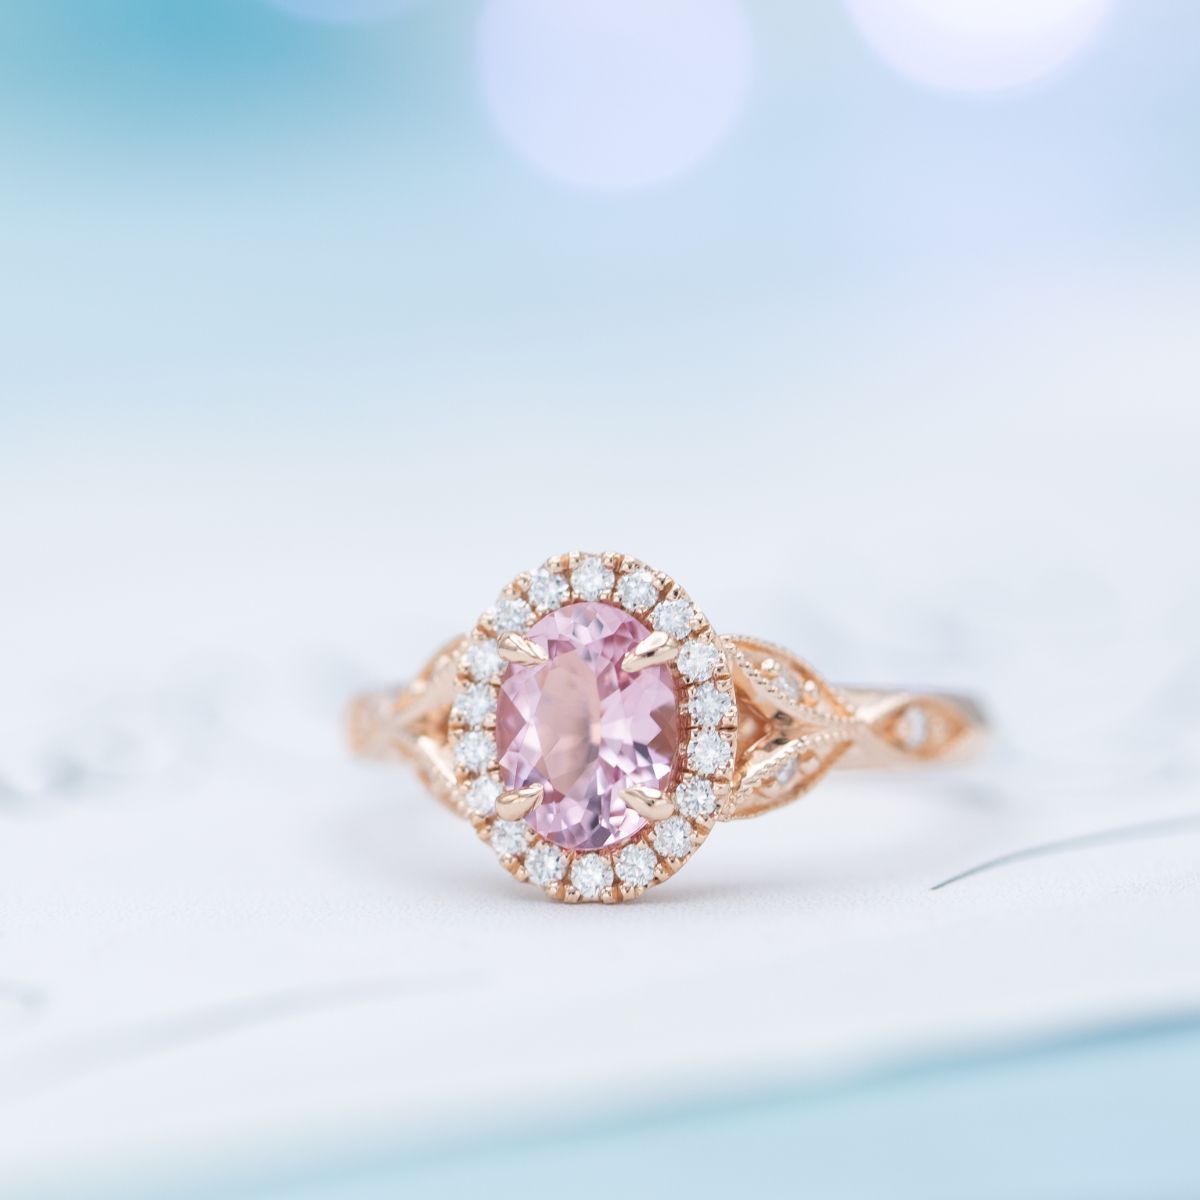 Morganite selection guide: color, cut, clarity, price, and more ...